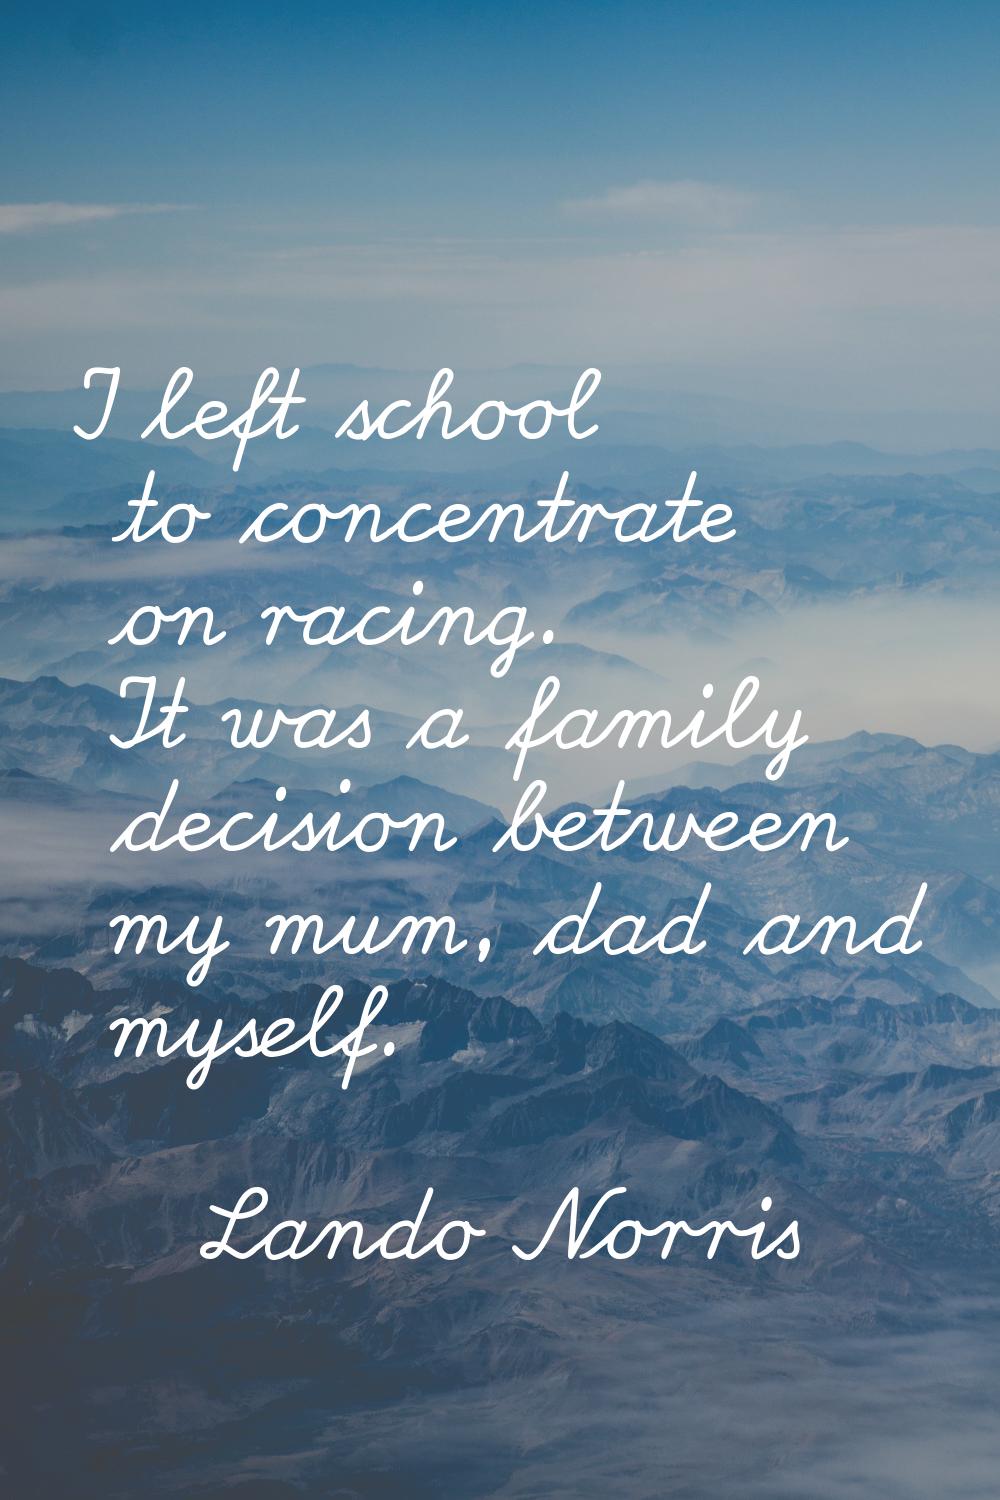 I left school to concentrate on racing. It was a family decision between my mum, dad and myself.